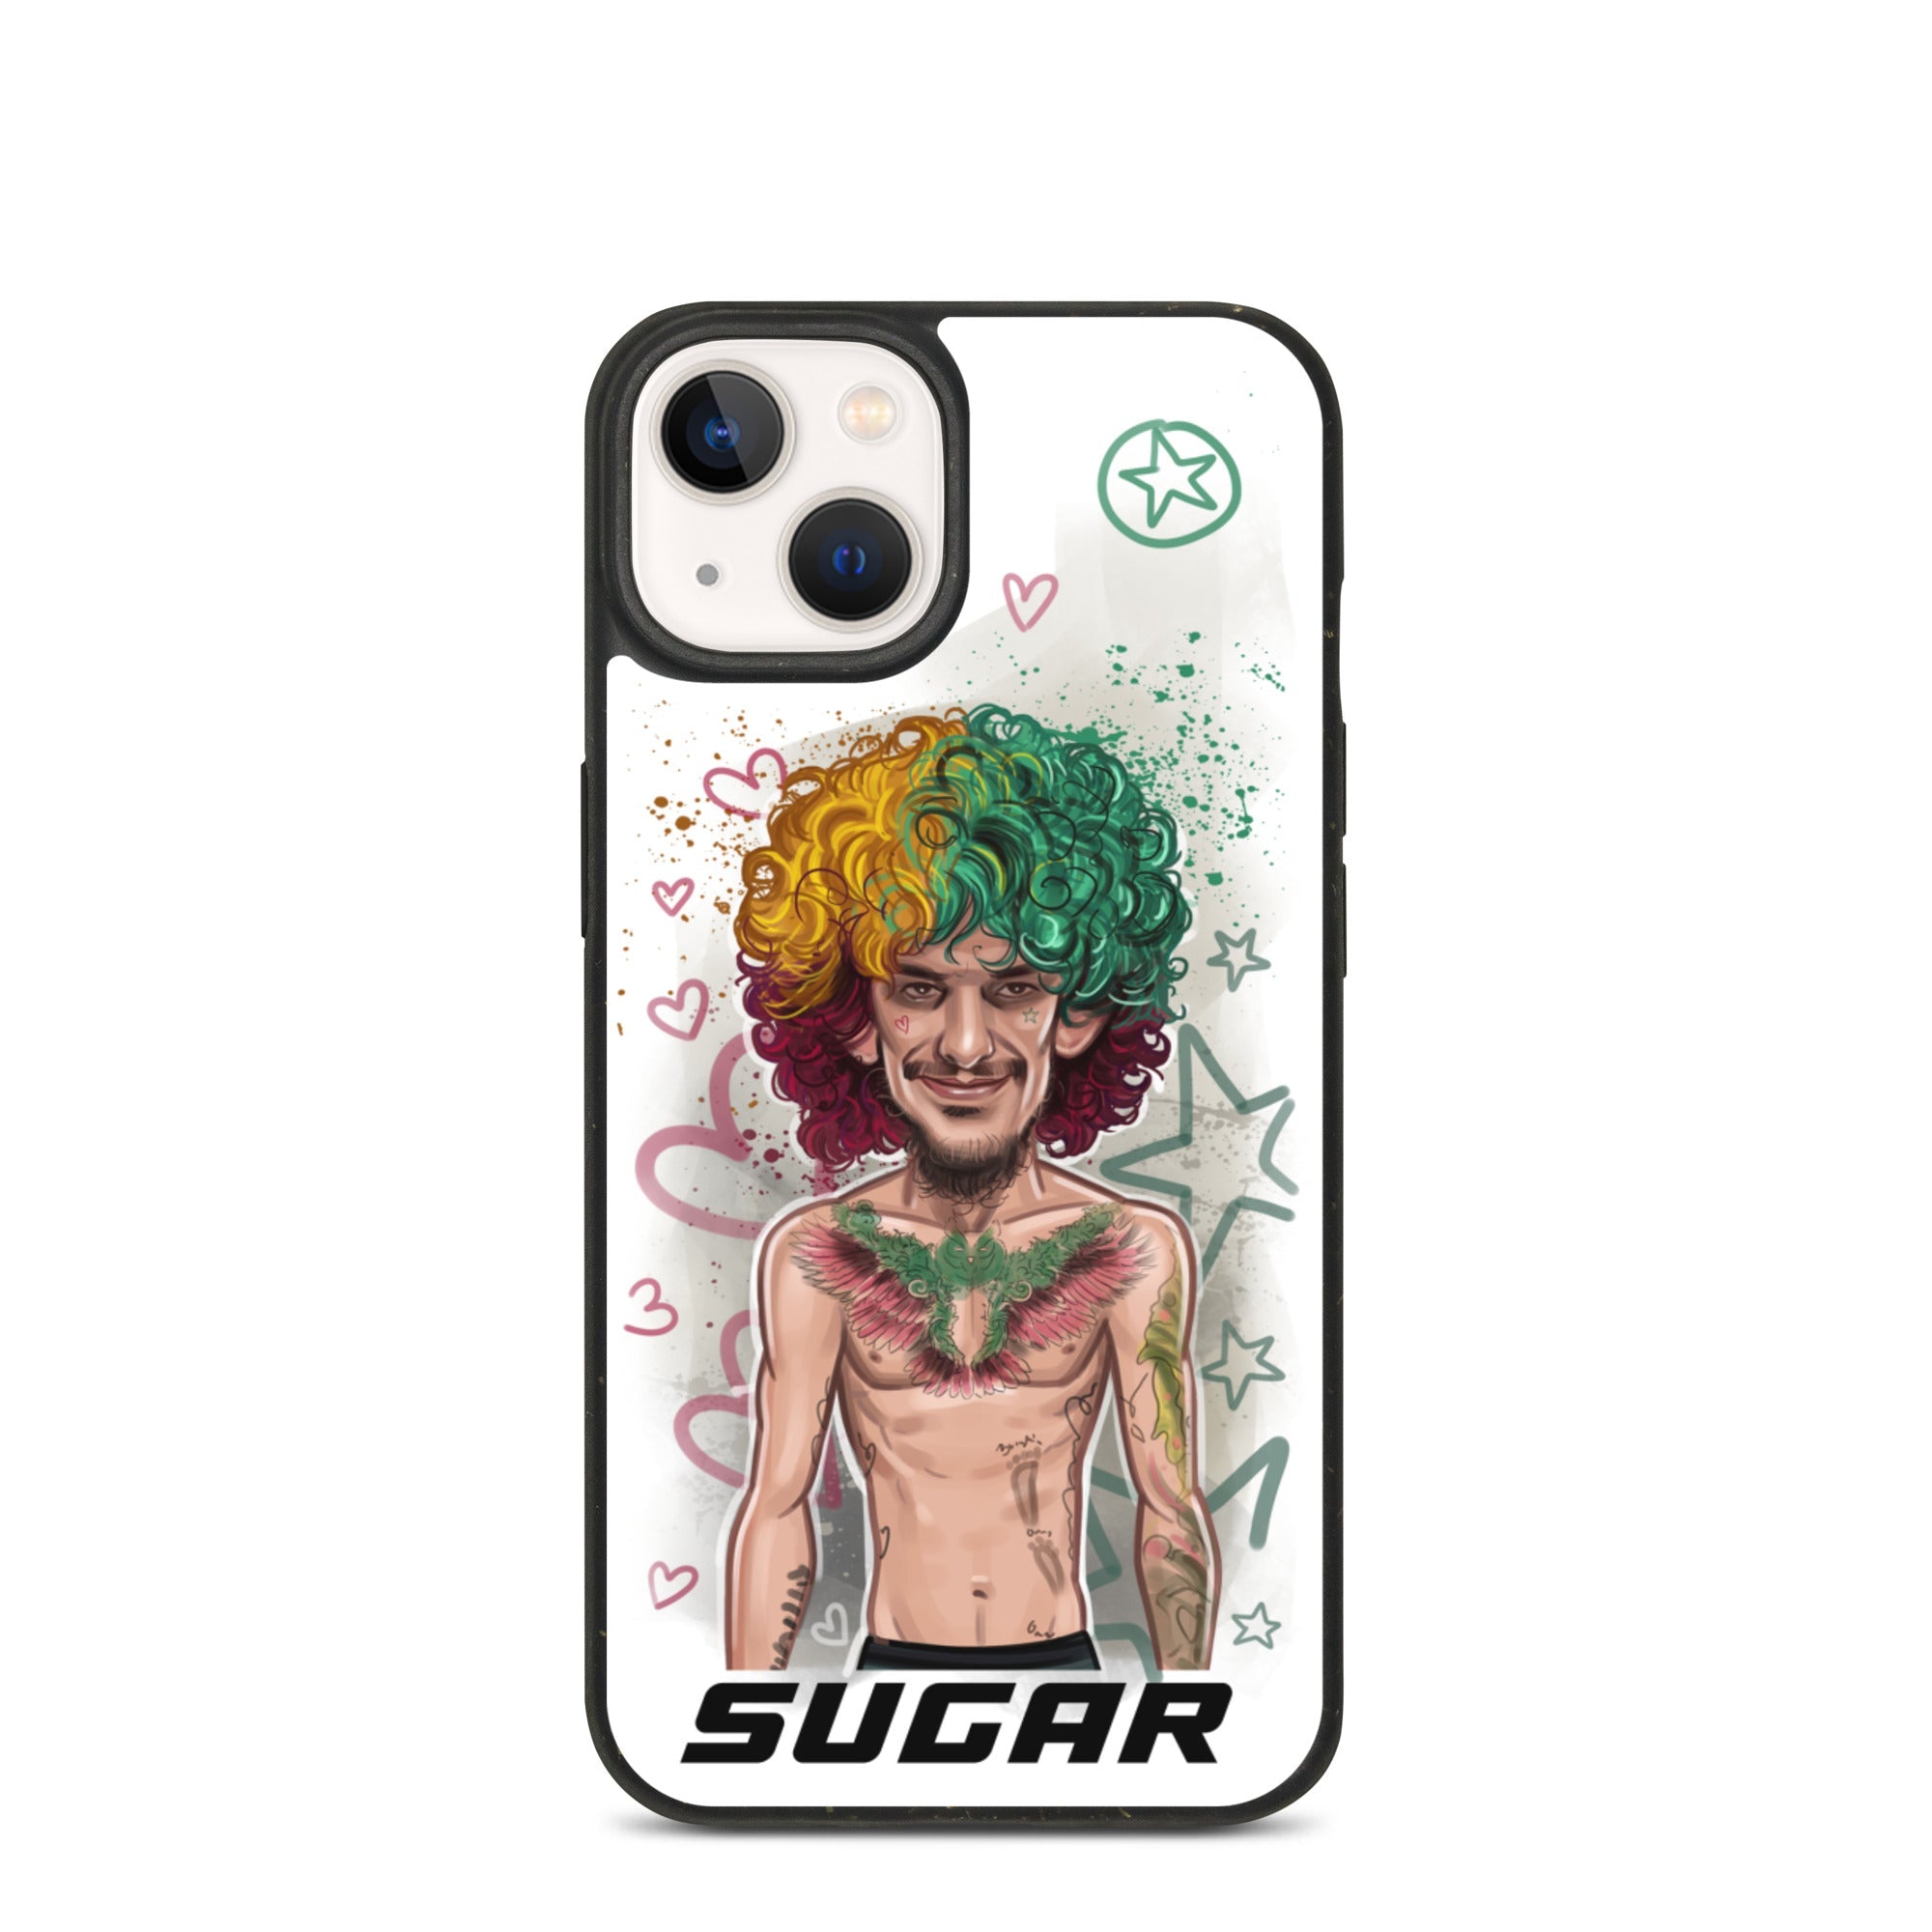 "Sugar" Sean O'Malley Speckled iPhone Case (Joker Version) Mobile Phone Cases